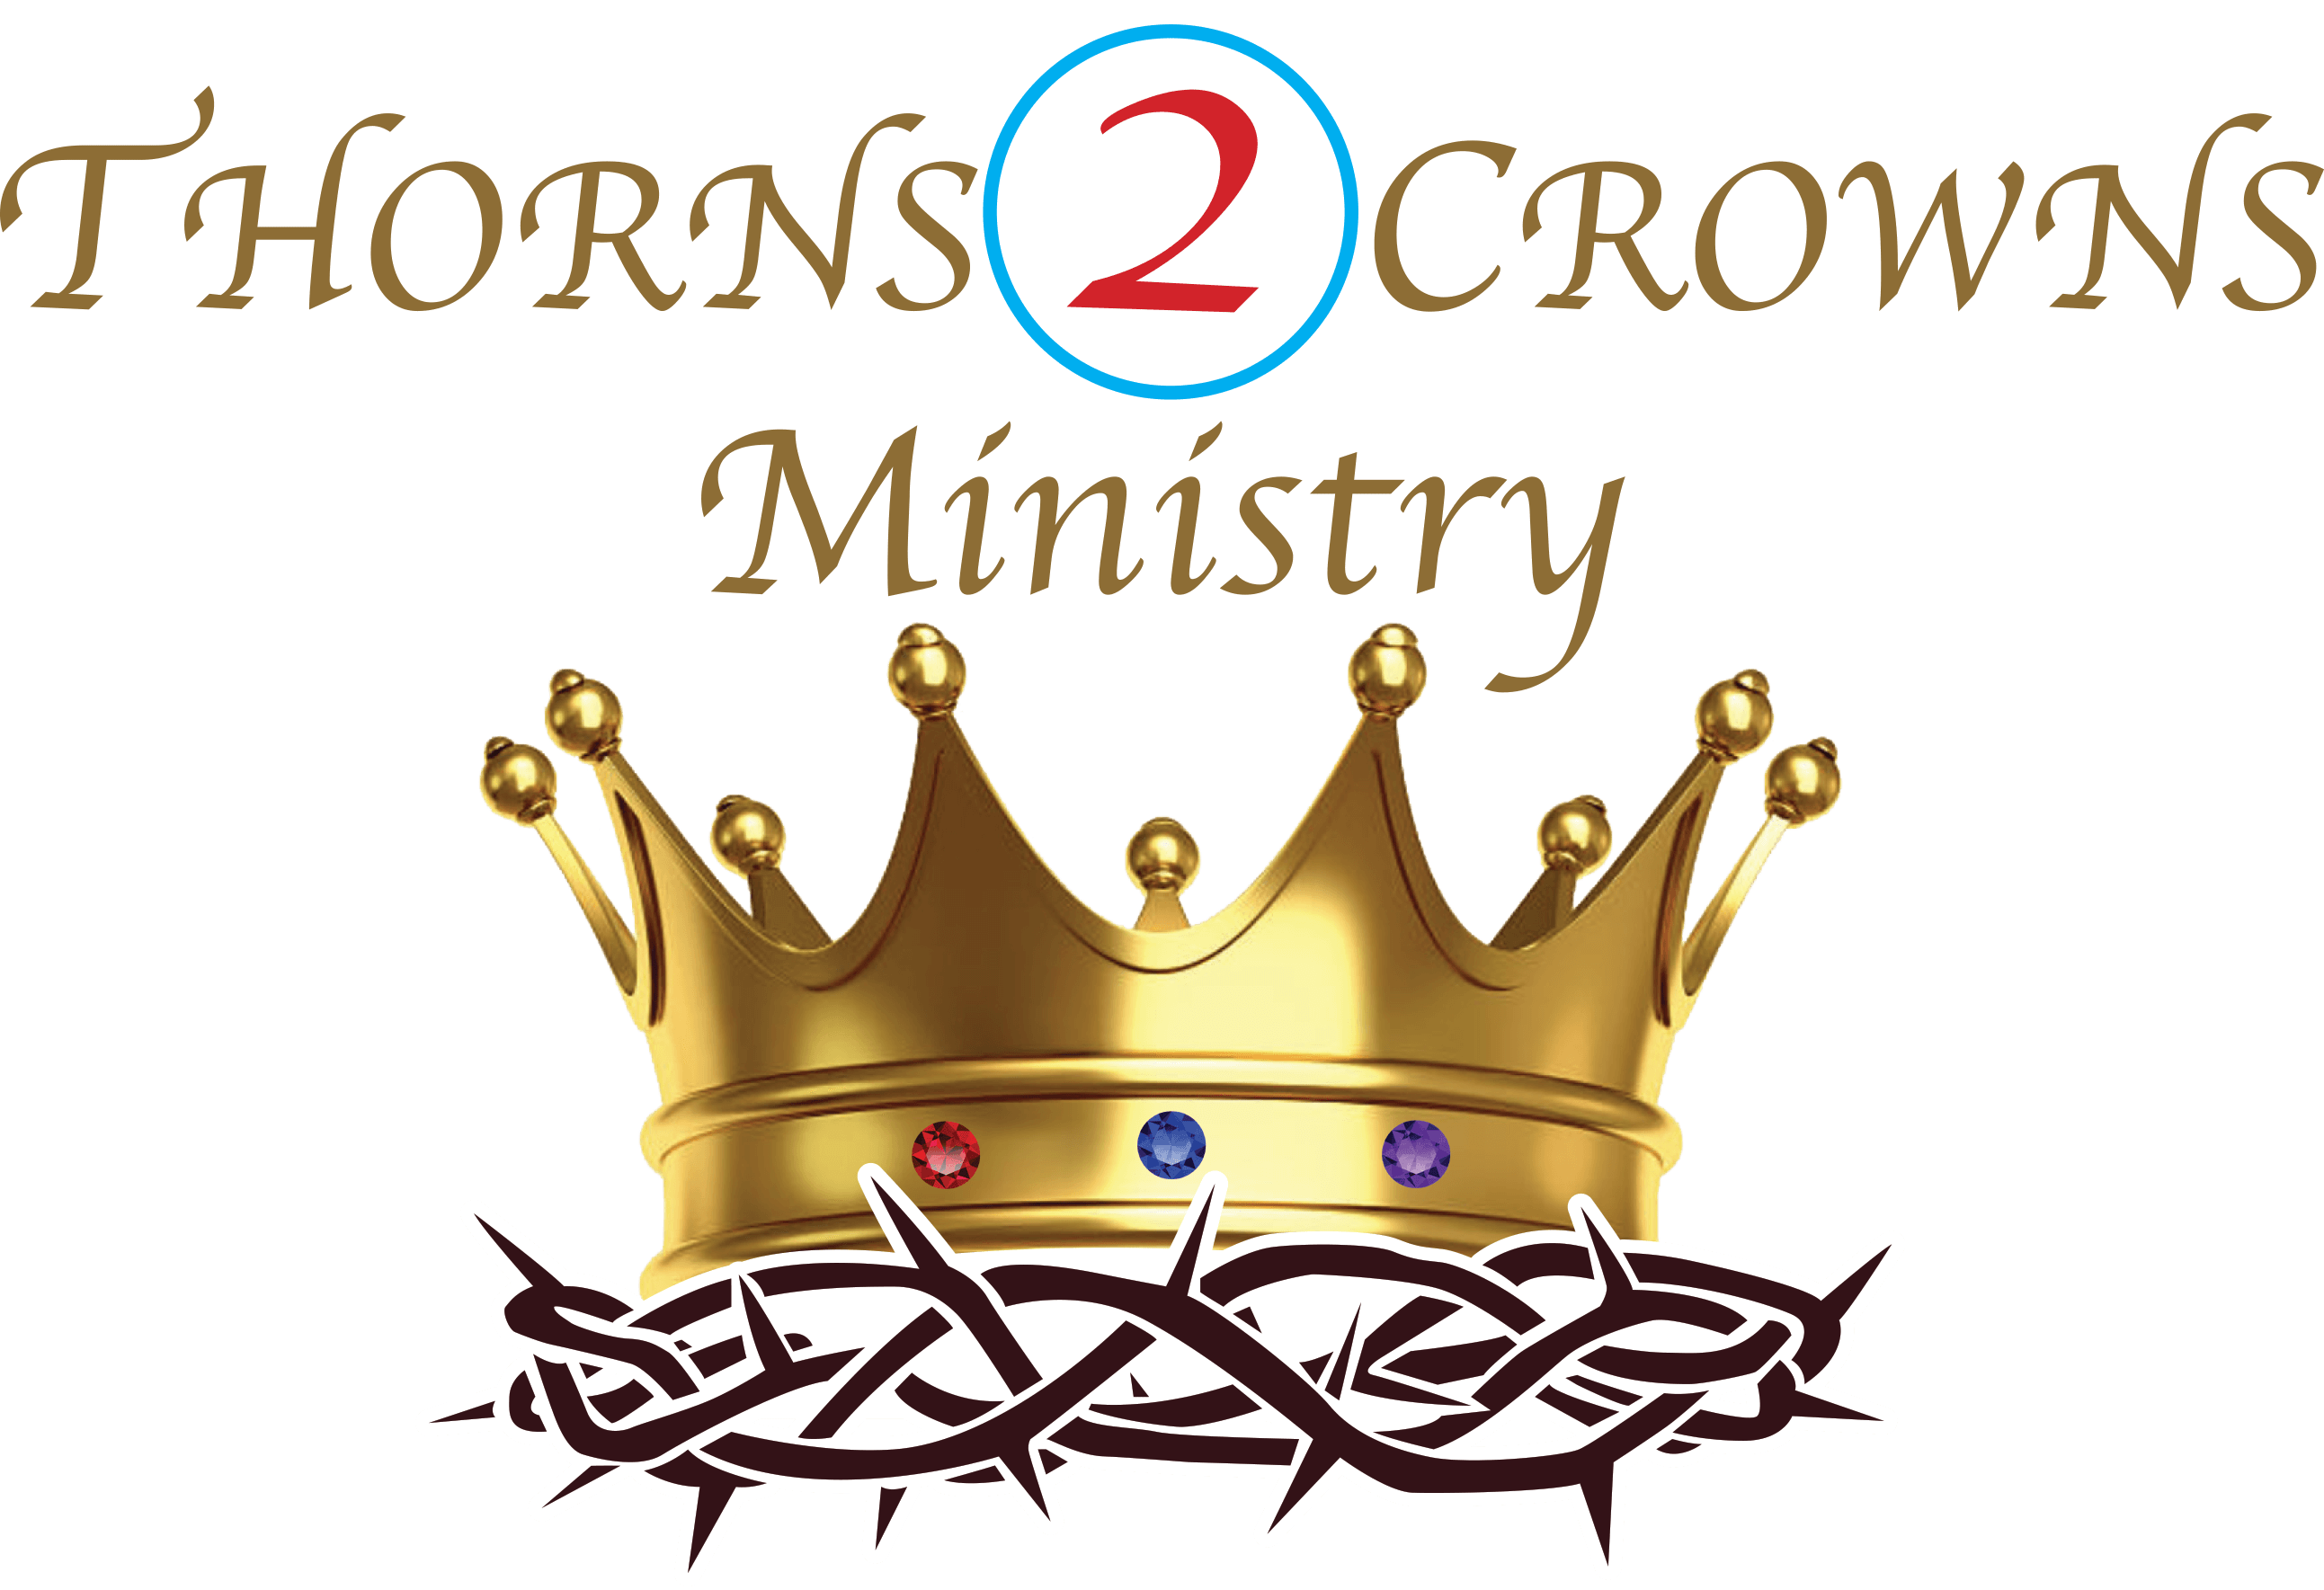 THORNS2CROWNS MINISTRY